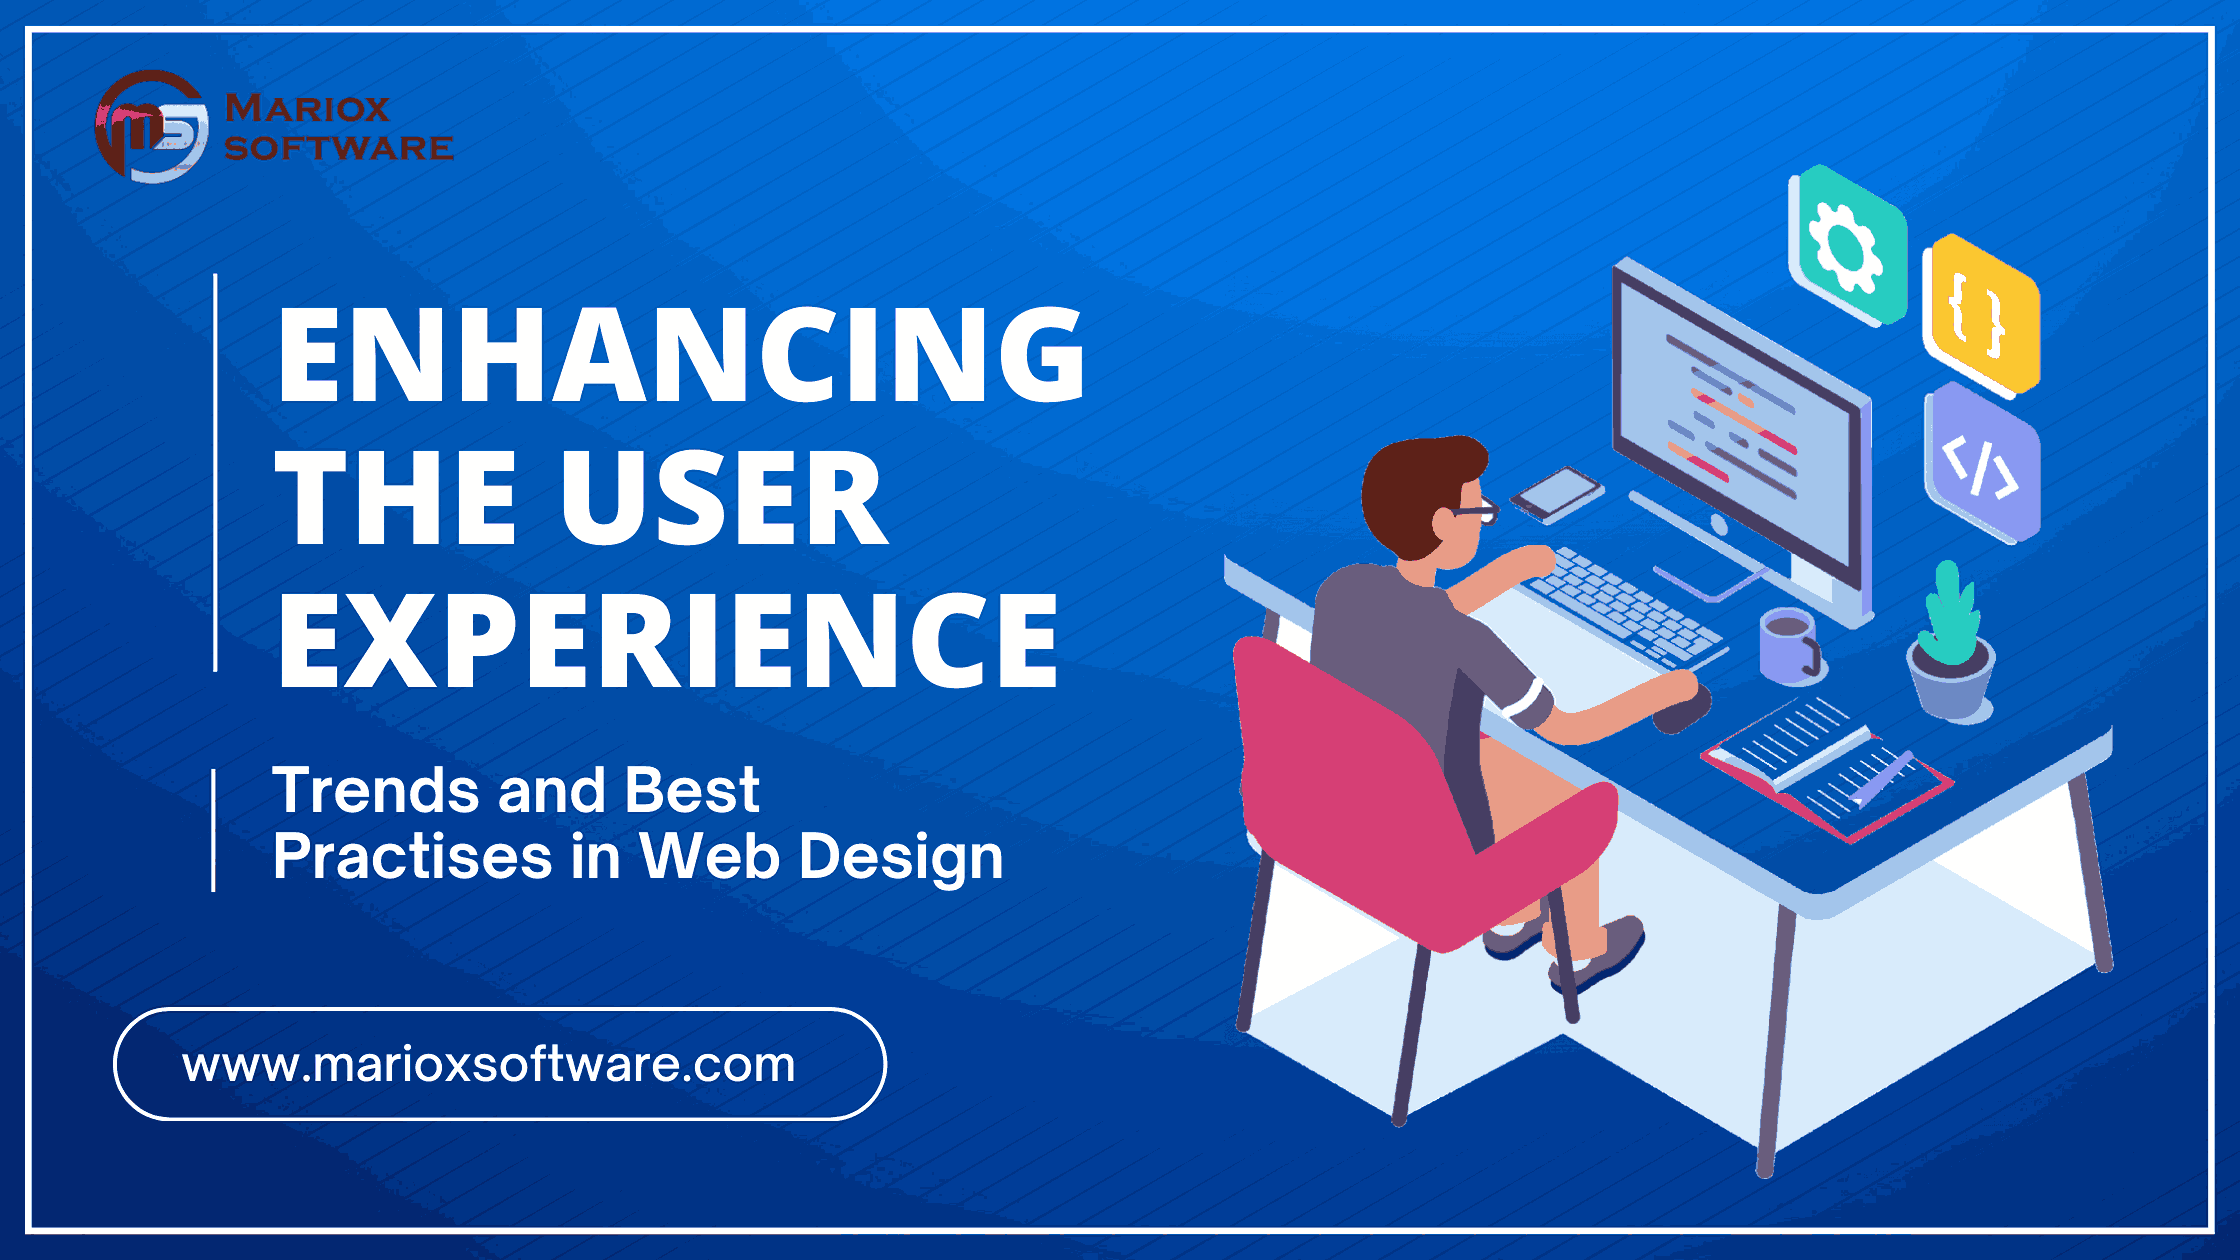 Enhancing the User Experience: Trends and Best Practises in Web Design